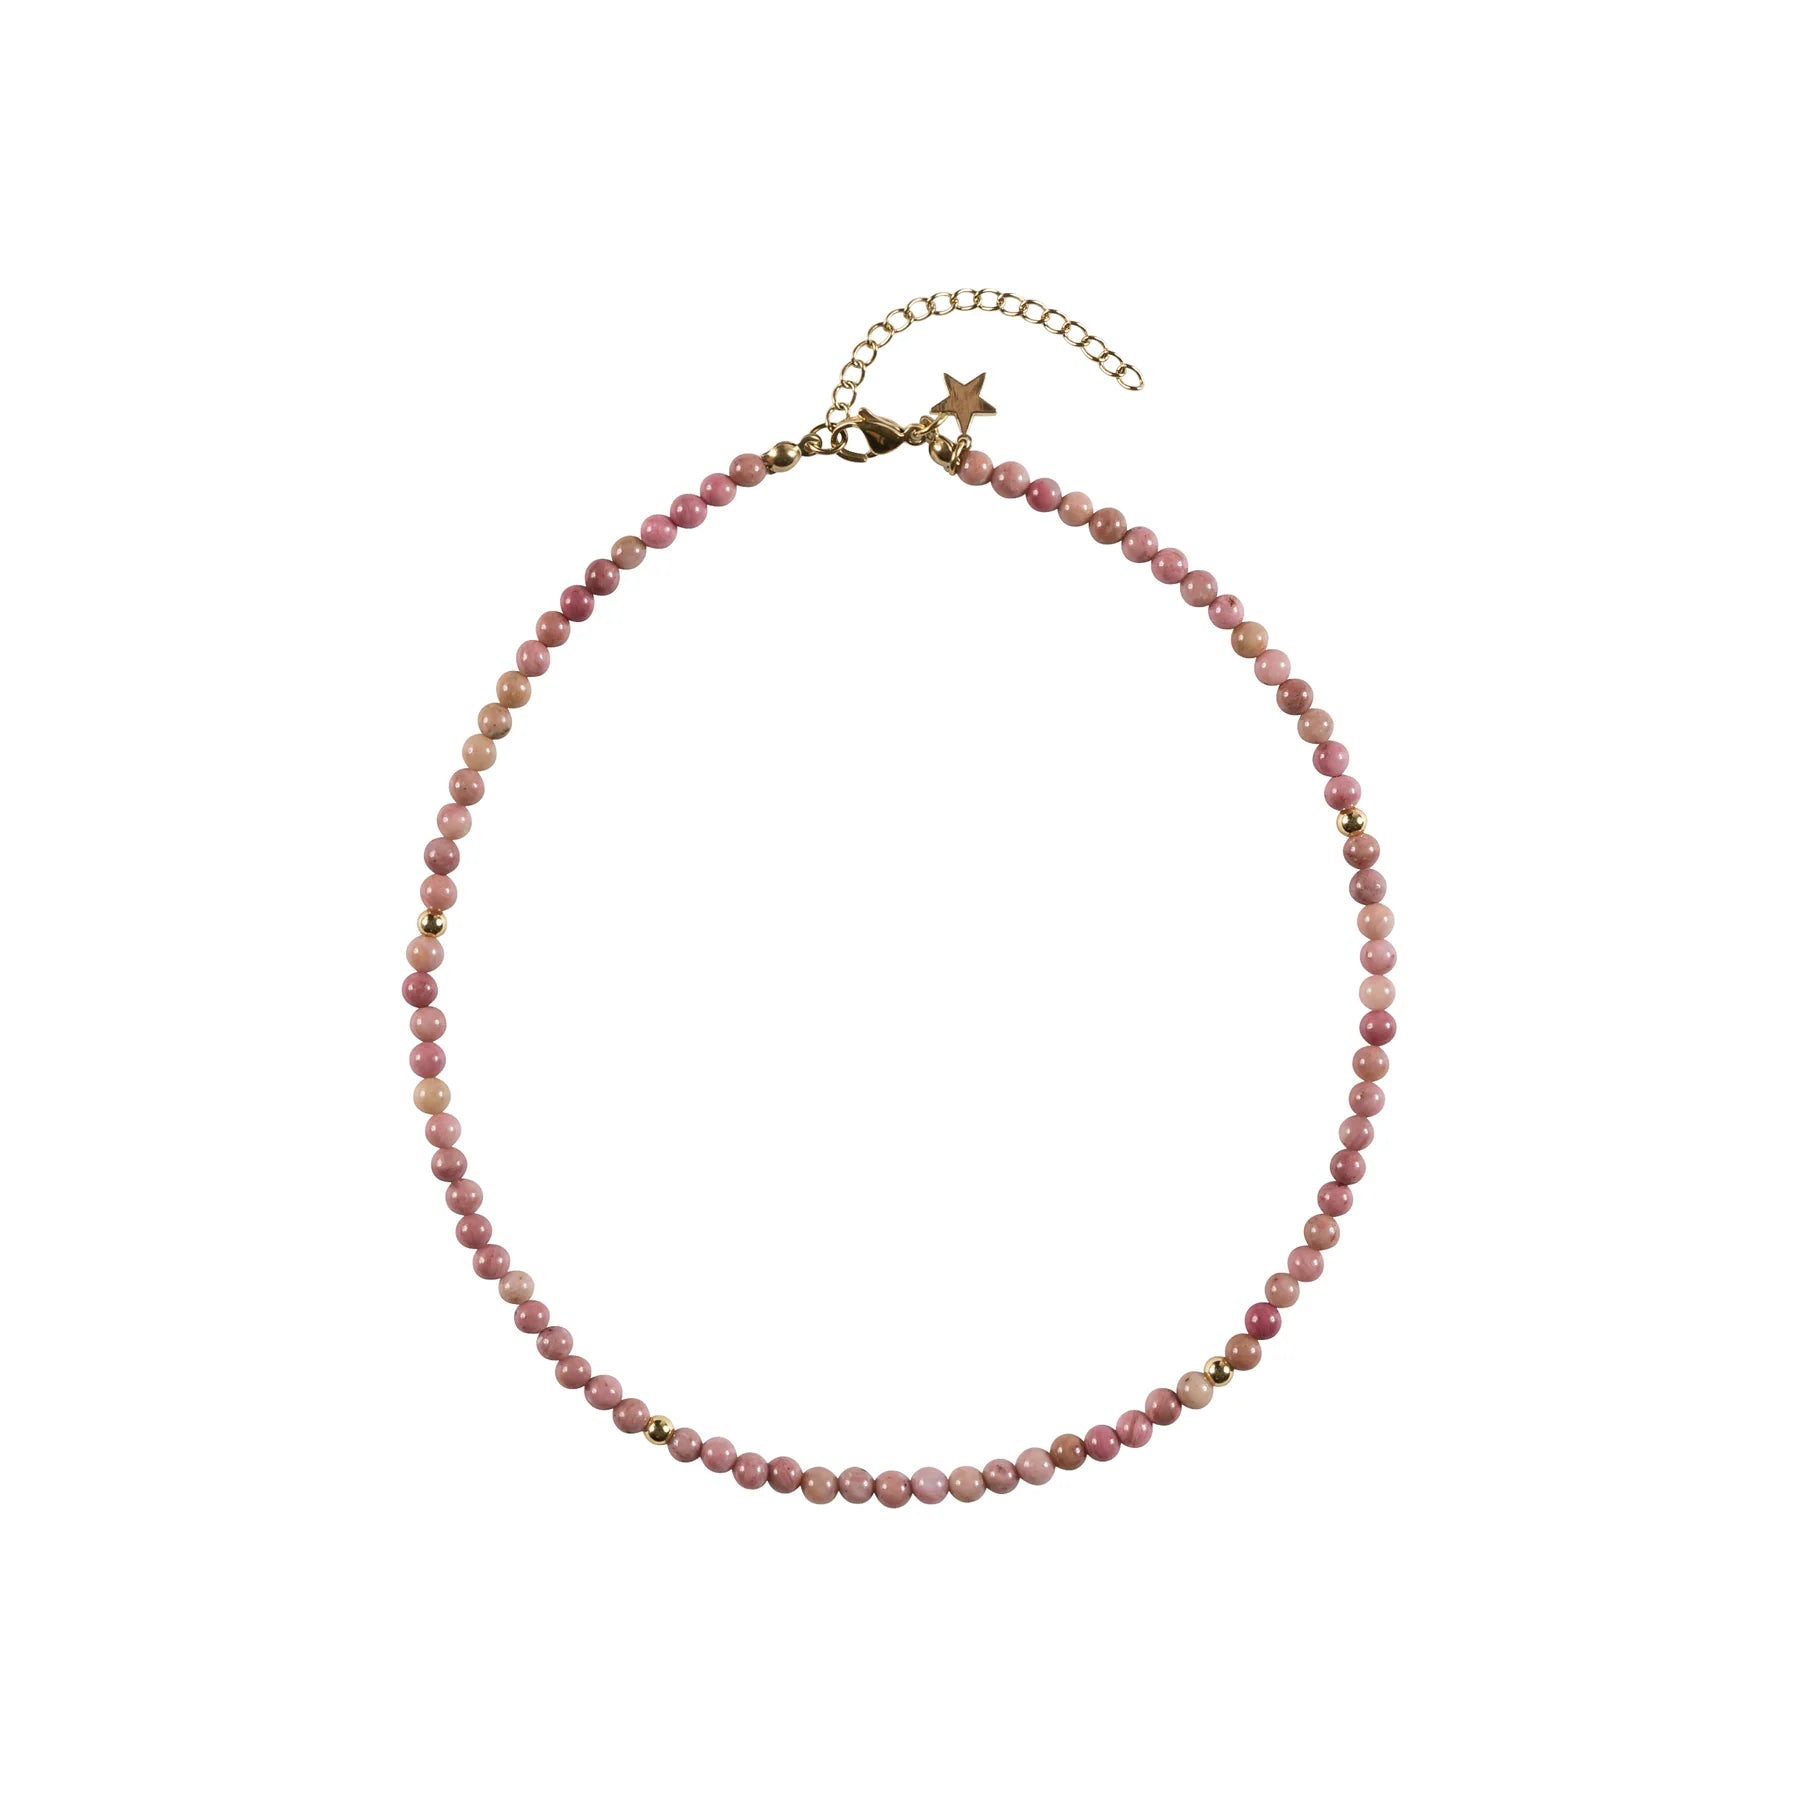 Stone Bead Necklace 4mm Dusty Rose